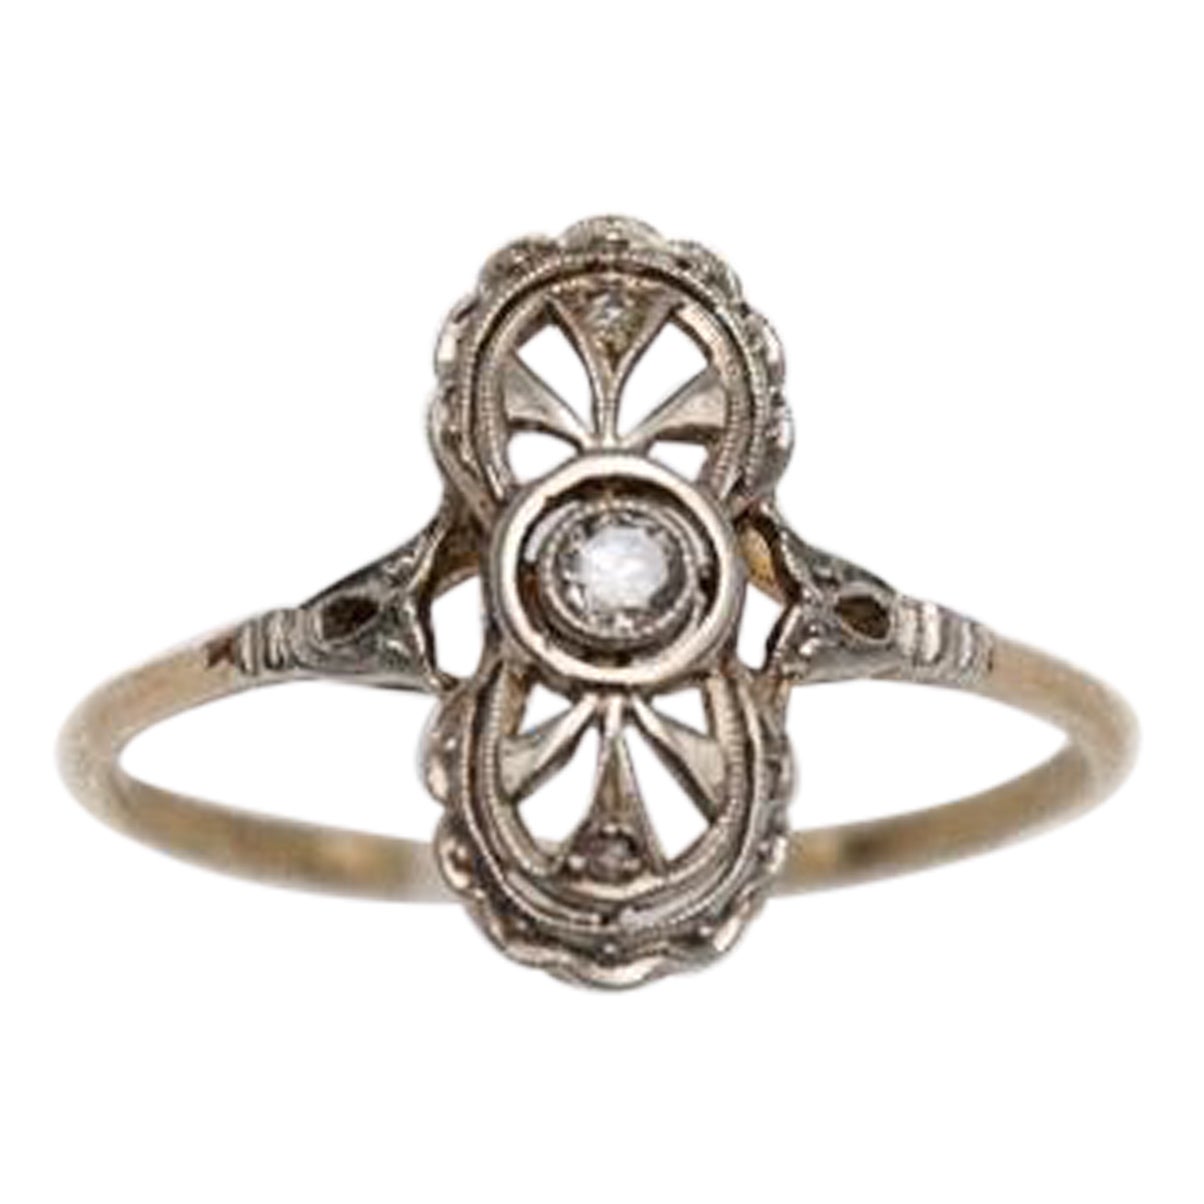 Small Art Deco ring with a diamond, 1920s-30s. For Sale